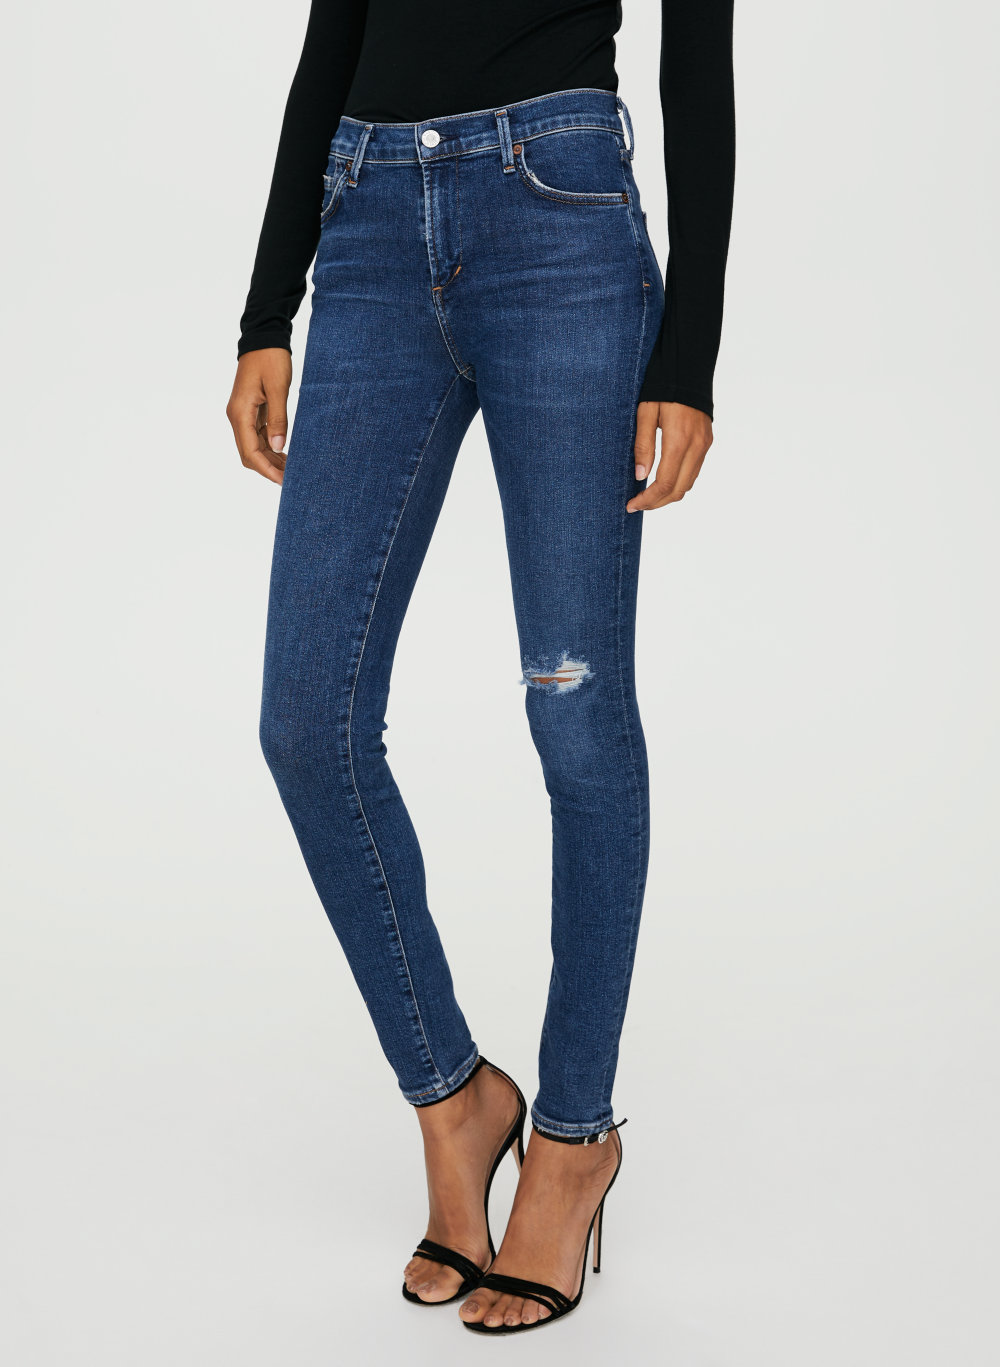 Buy > citizens of humanity rocket high rise skinny sale > in stock